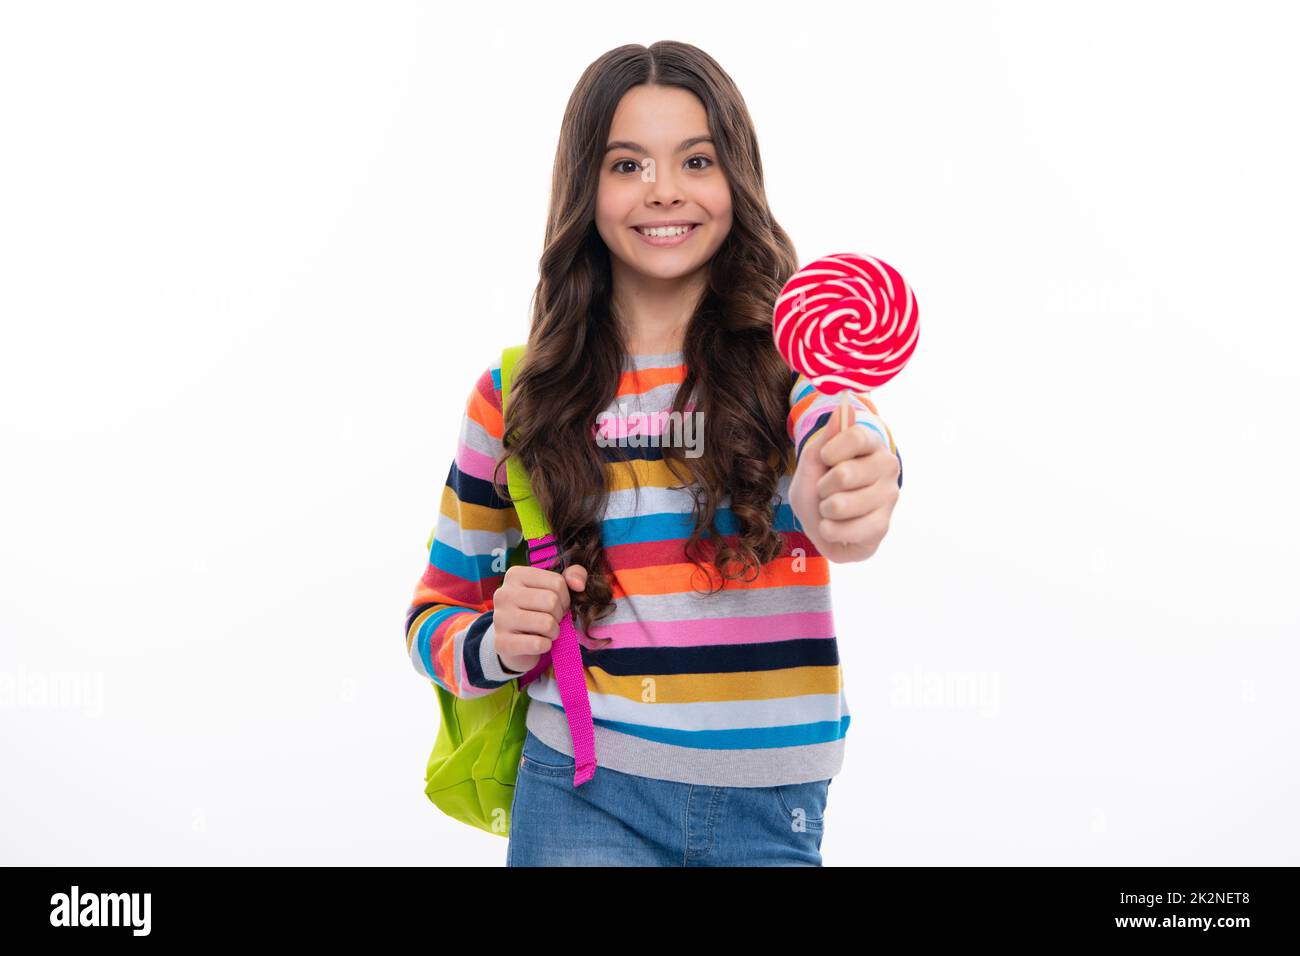 Funny child with lollipop over white isolated background. Sweet childhood life. Teen girl with yummy caramel lollipop, candy shop. Happy girl face Stock Photo